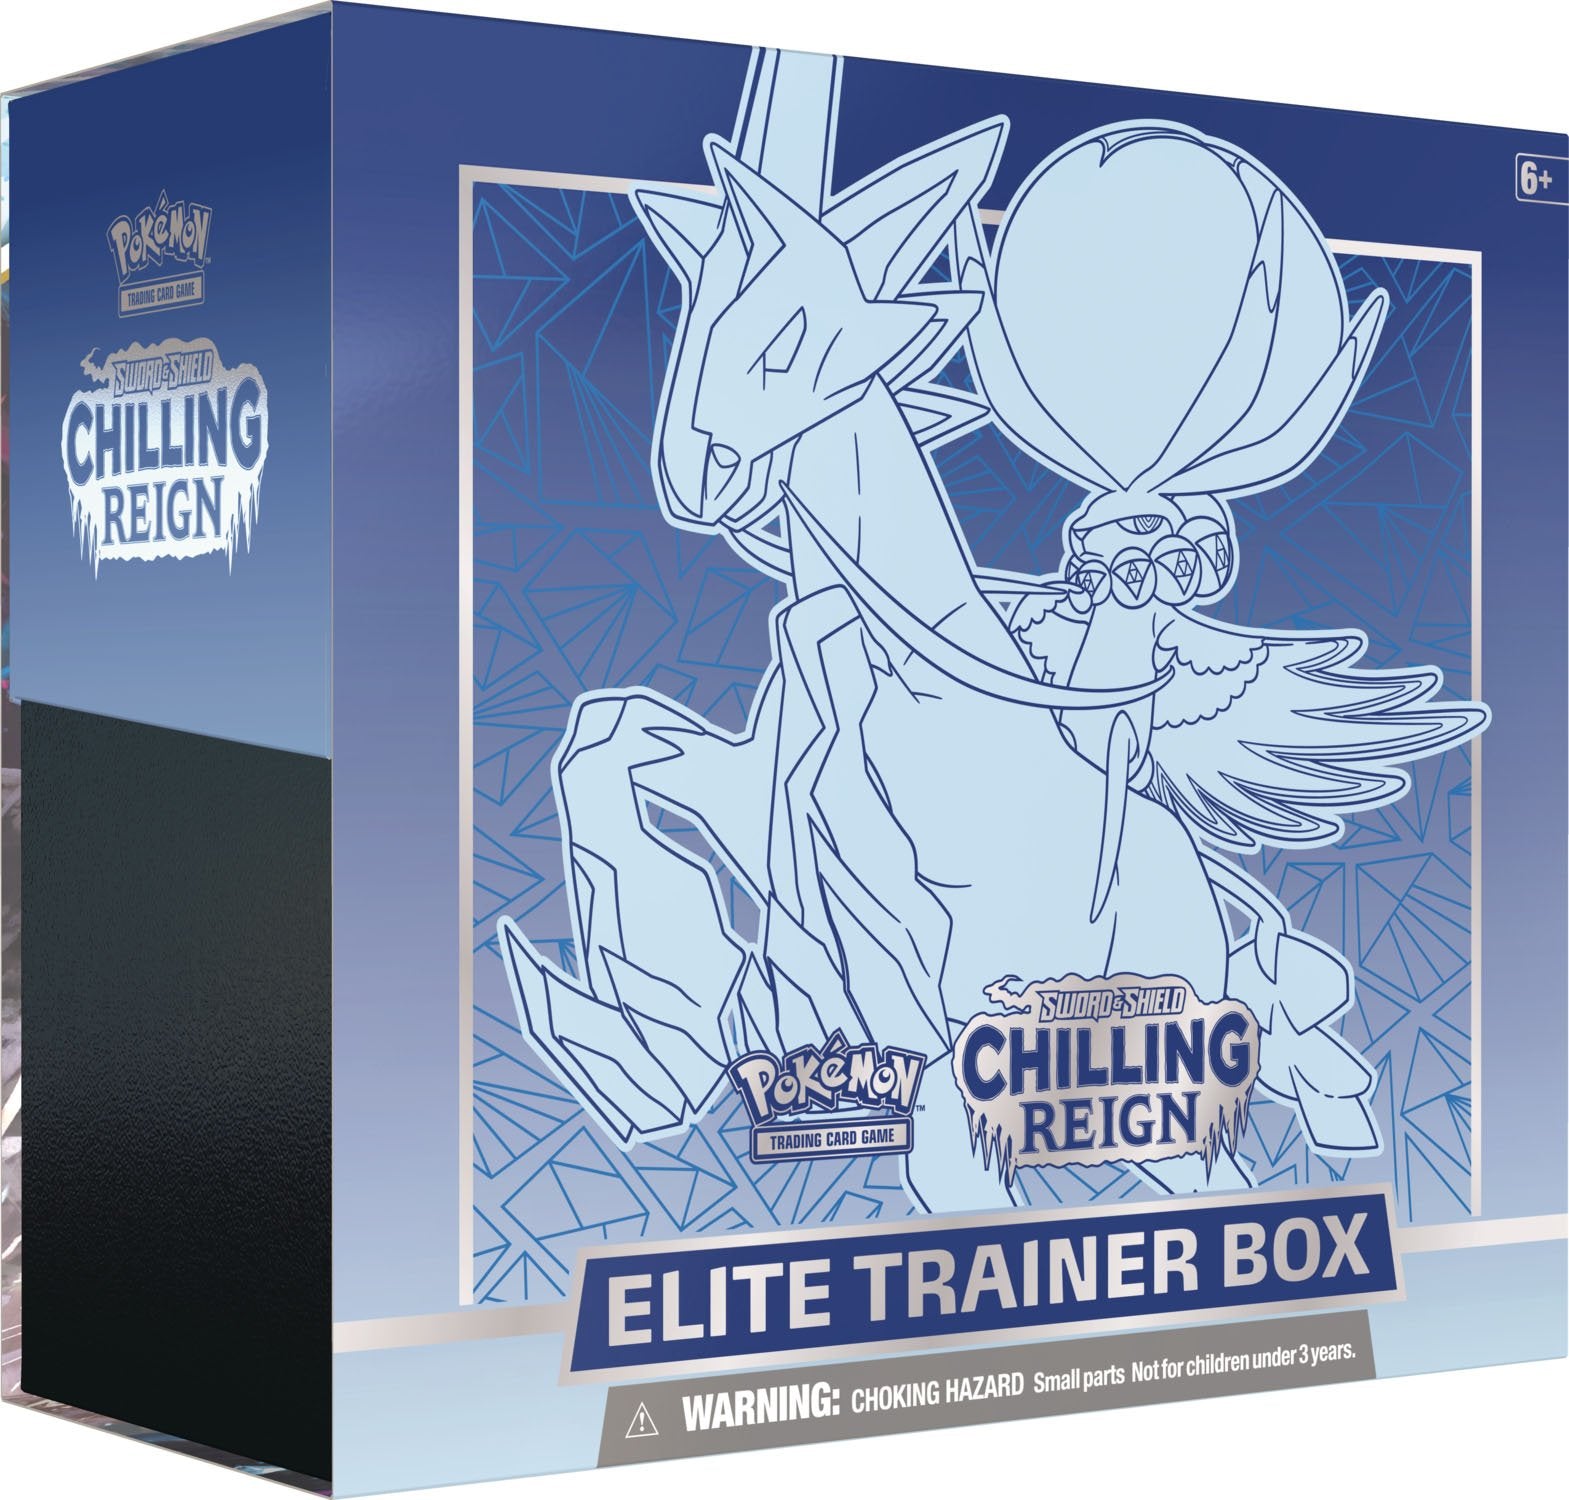 Pokémon Sword & Shield Chilling Reign Booster Pack Trading Card Game